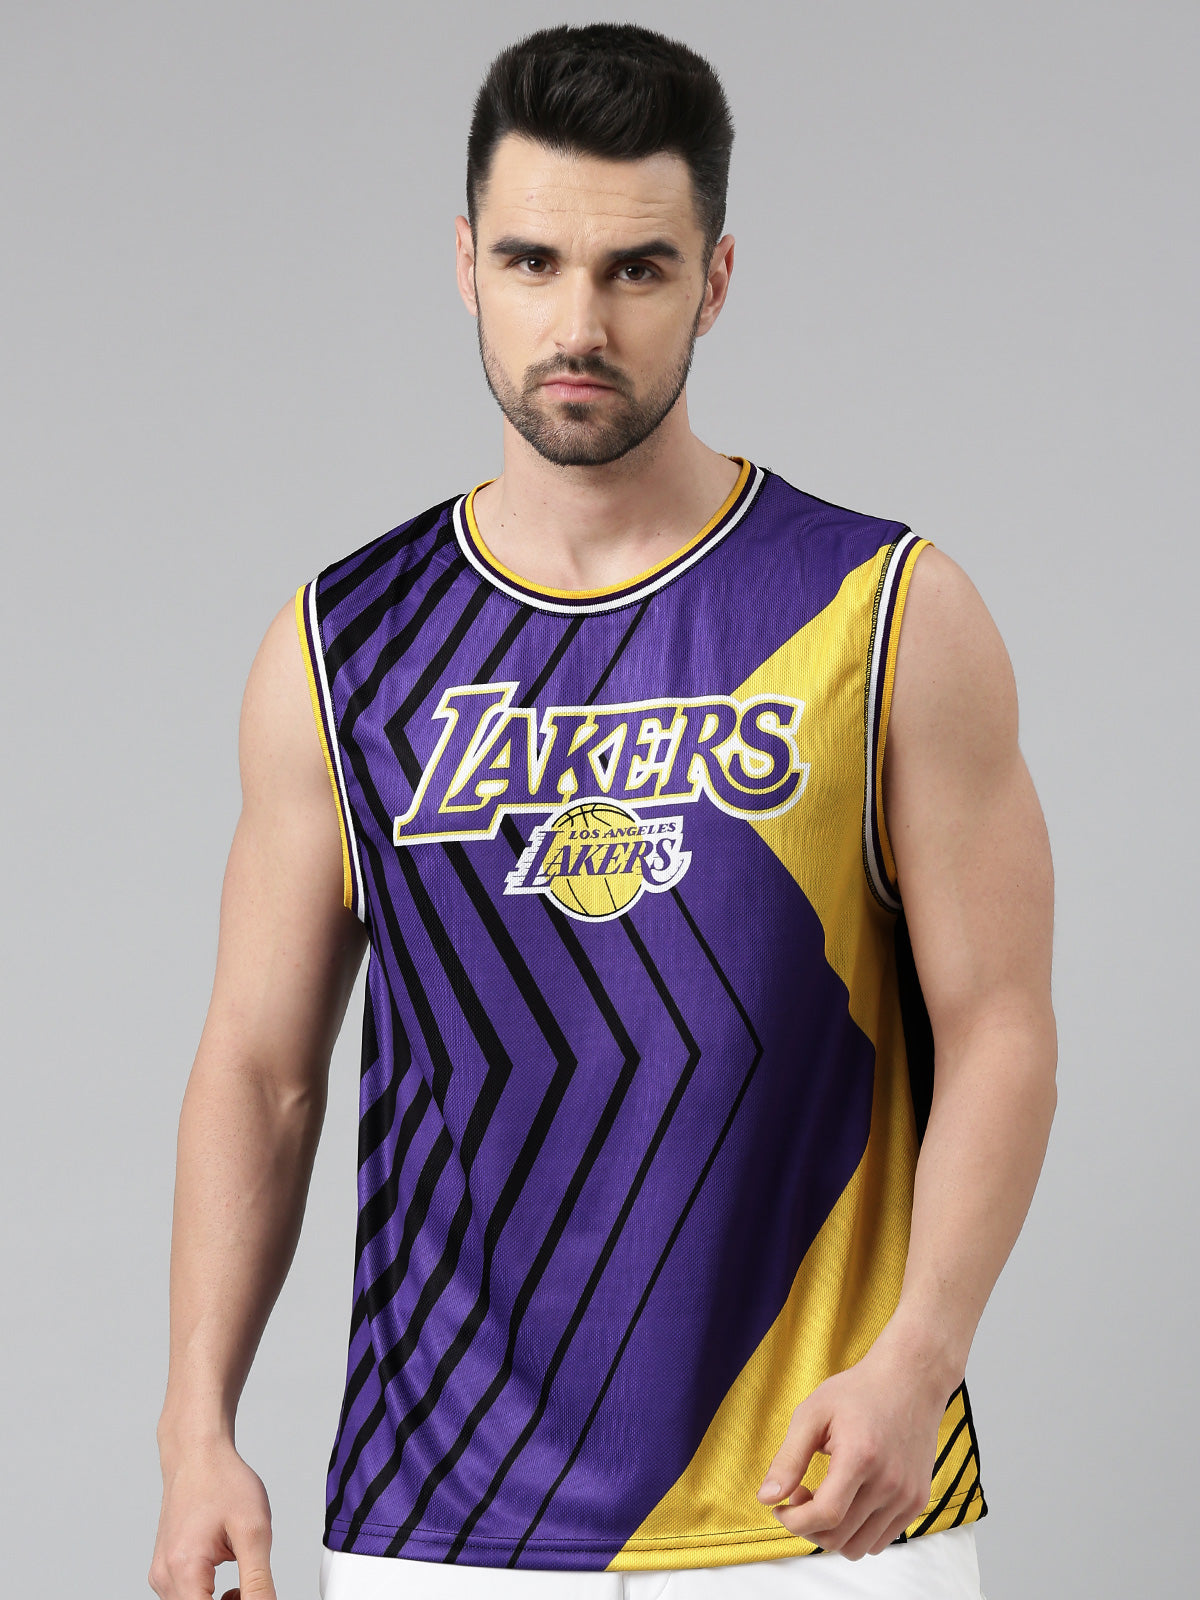 Nba Los Angeles Lakers L.A. Lakers Team Jersey purple white yellow size XL